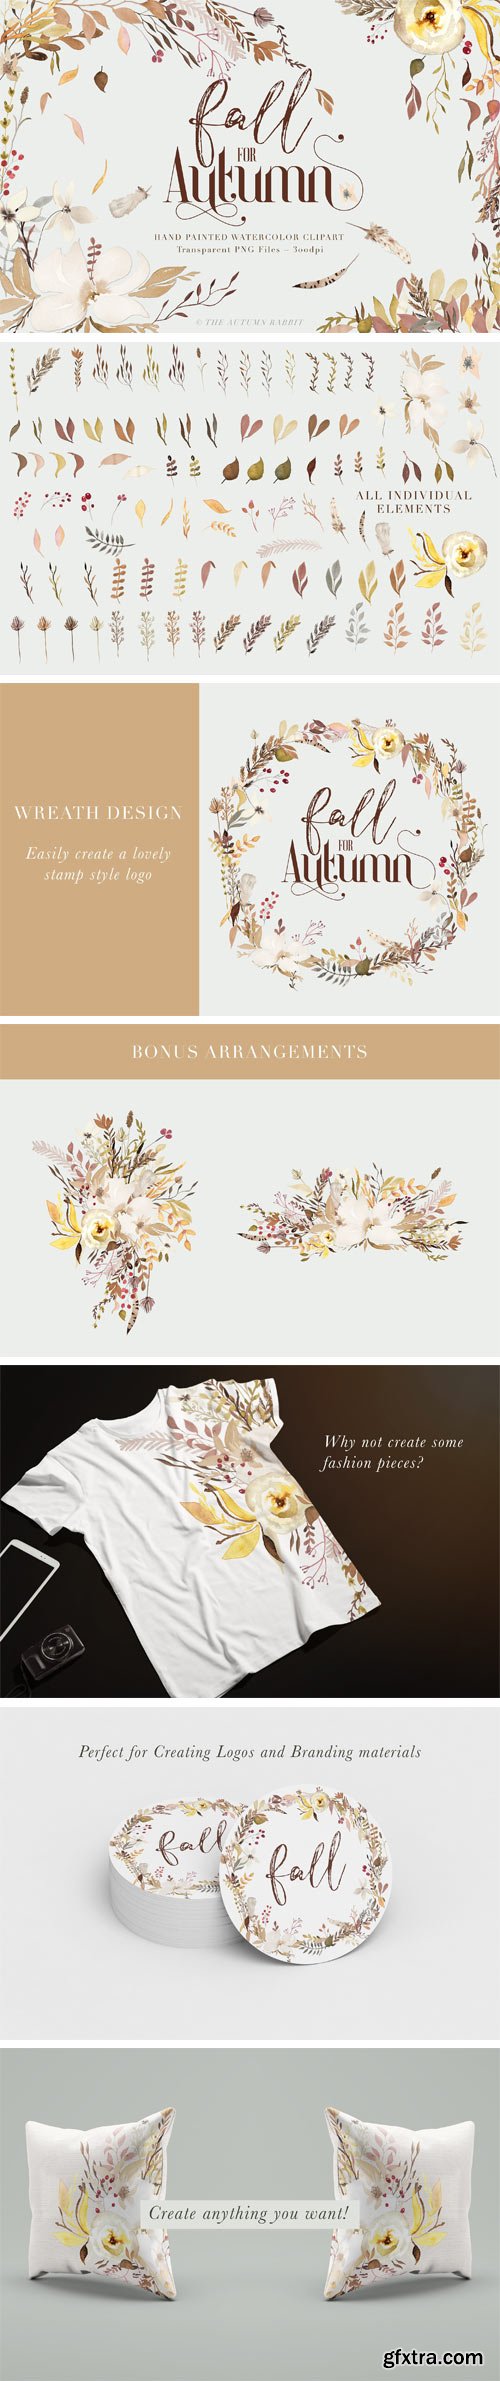 CM - Fall for Autumn - Watercolor Clipart 1741003